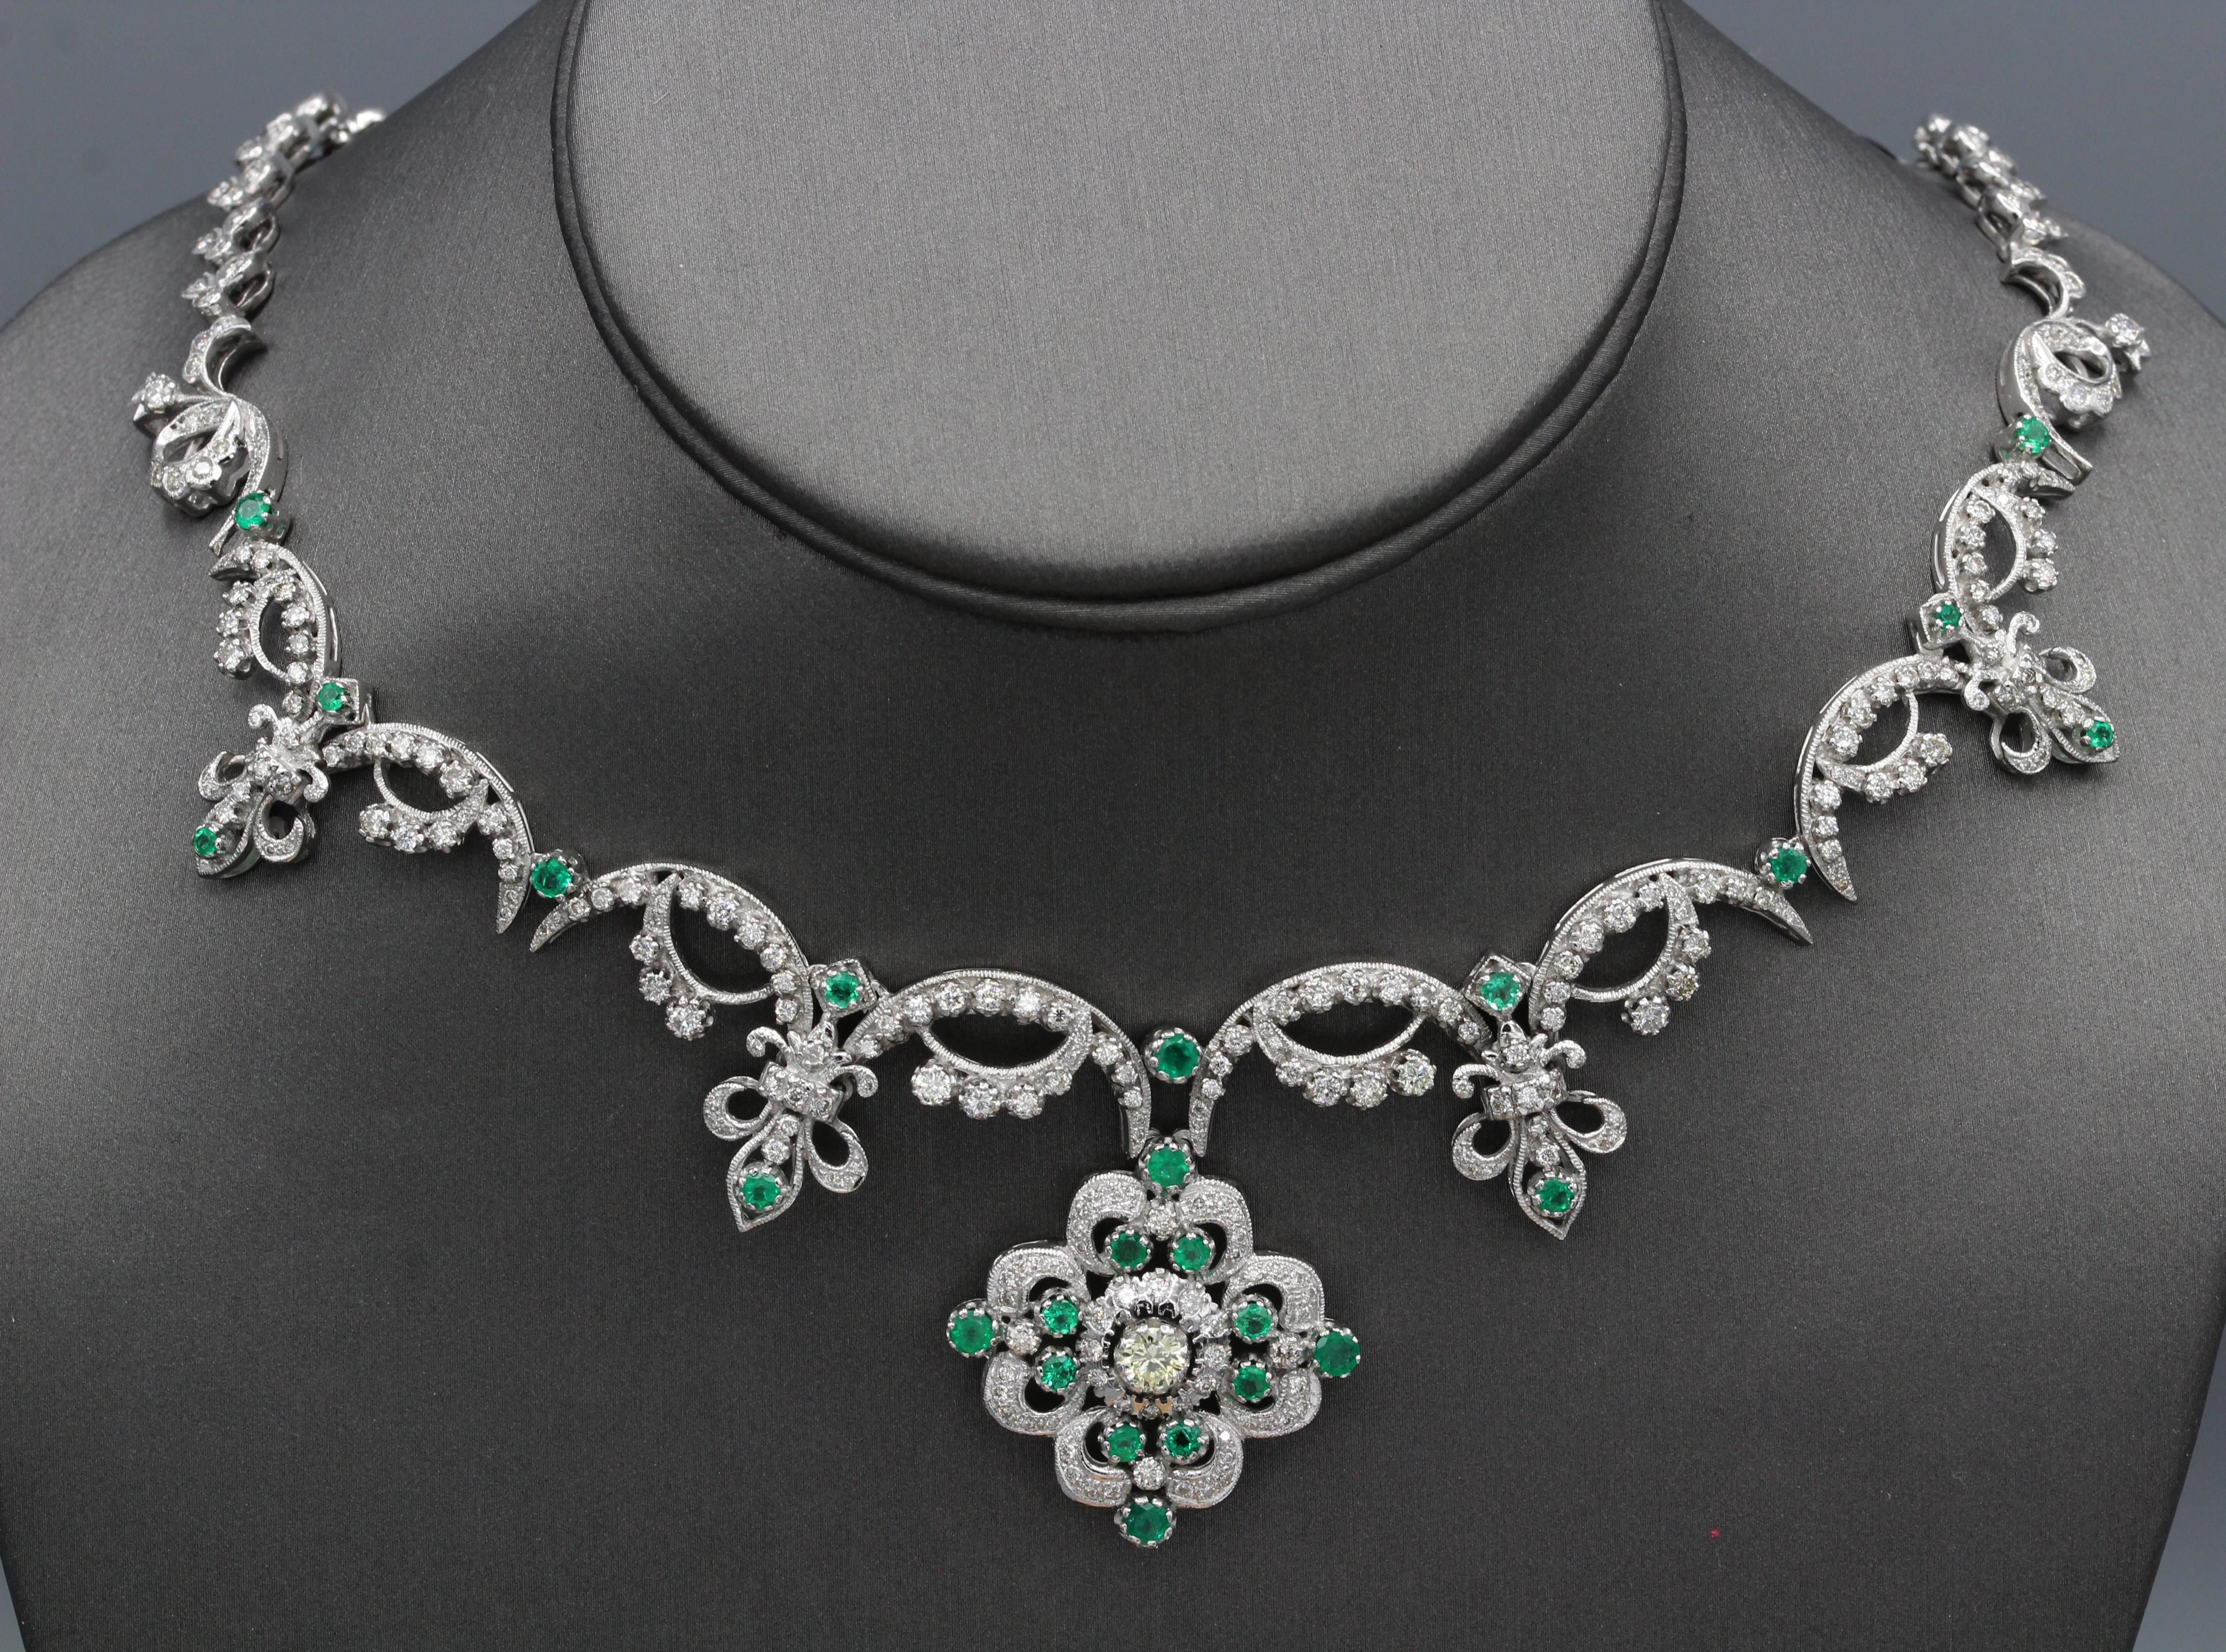 New, never used Fancy Victorian Style Necklace, Diamonds & Diamonds, Vintage -bwas made a bit over 20 Years Ago.
Total natural Diamonds 9.05 Carat, GH-SI. 
Total natural Emerald 1.96 Carat. 18k White Gold 64 Grams. Center Piece is approx. 1'